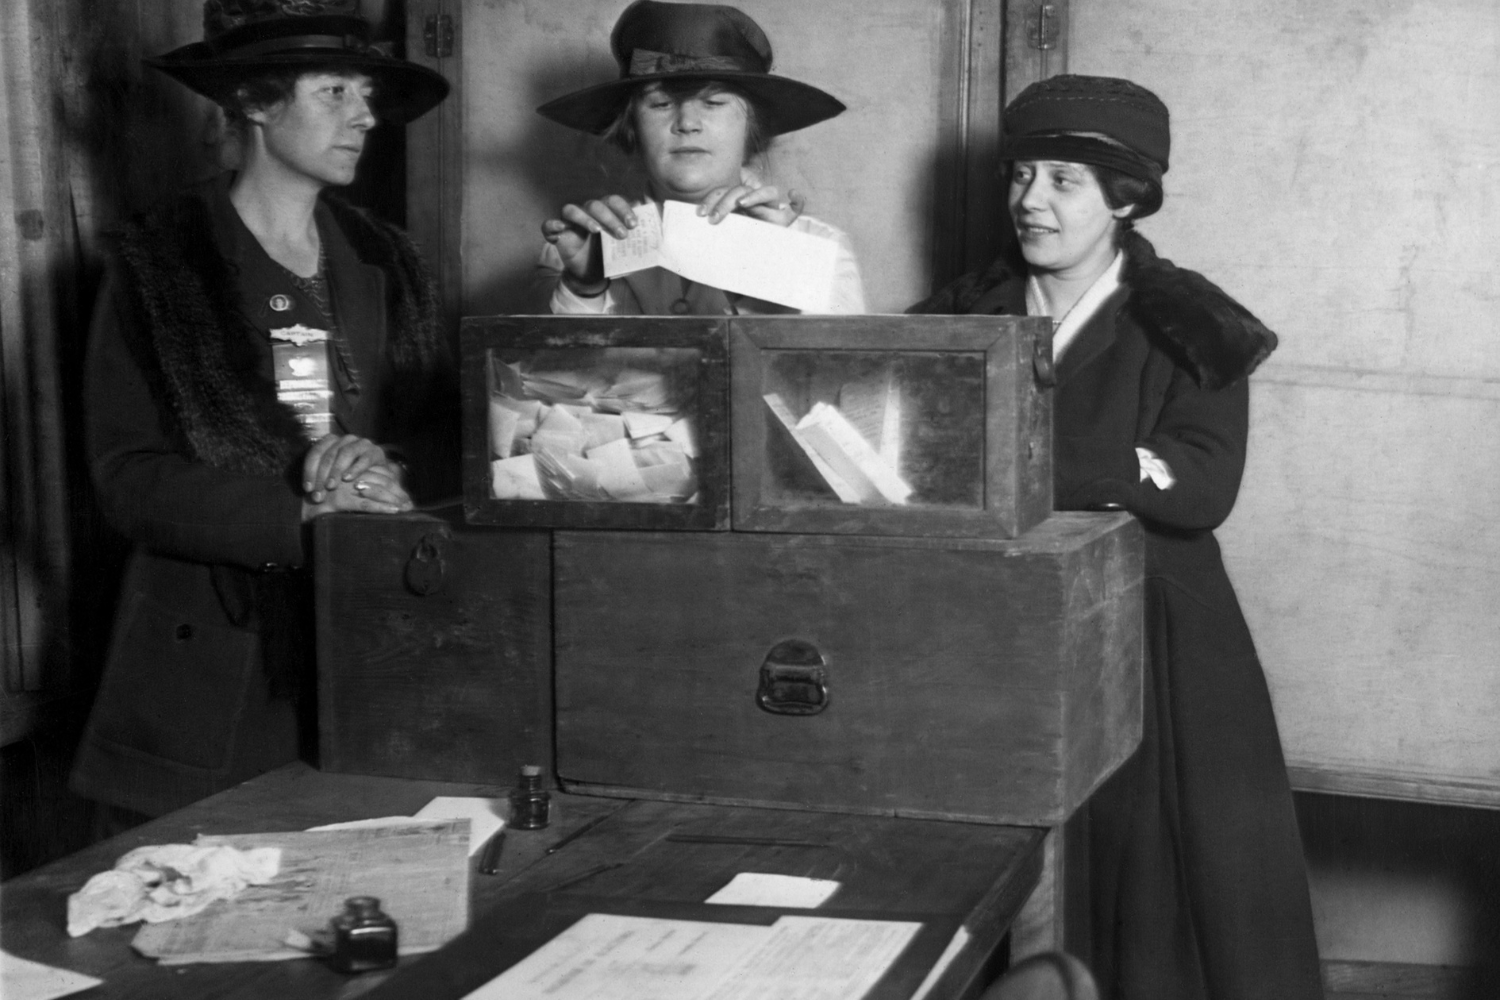 women voting for the first time